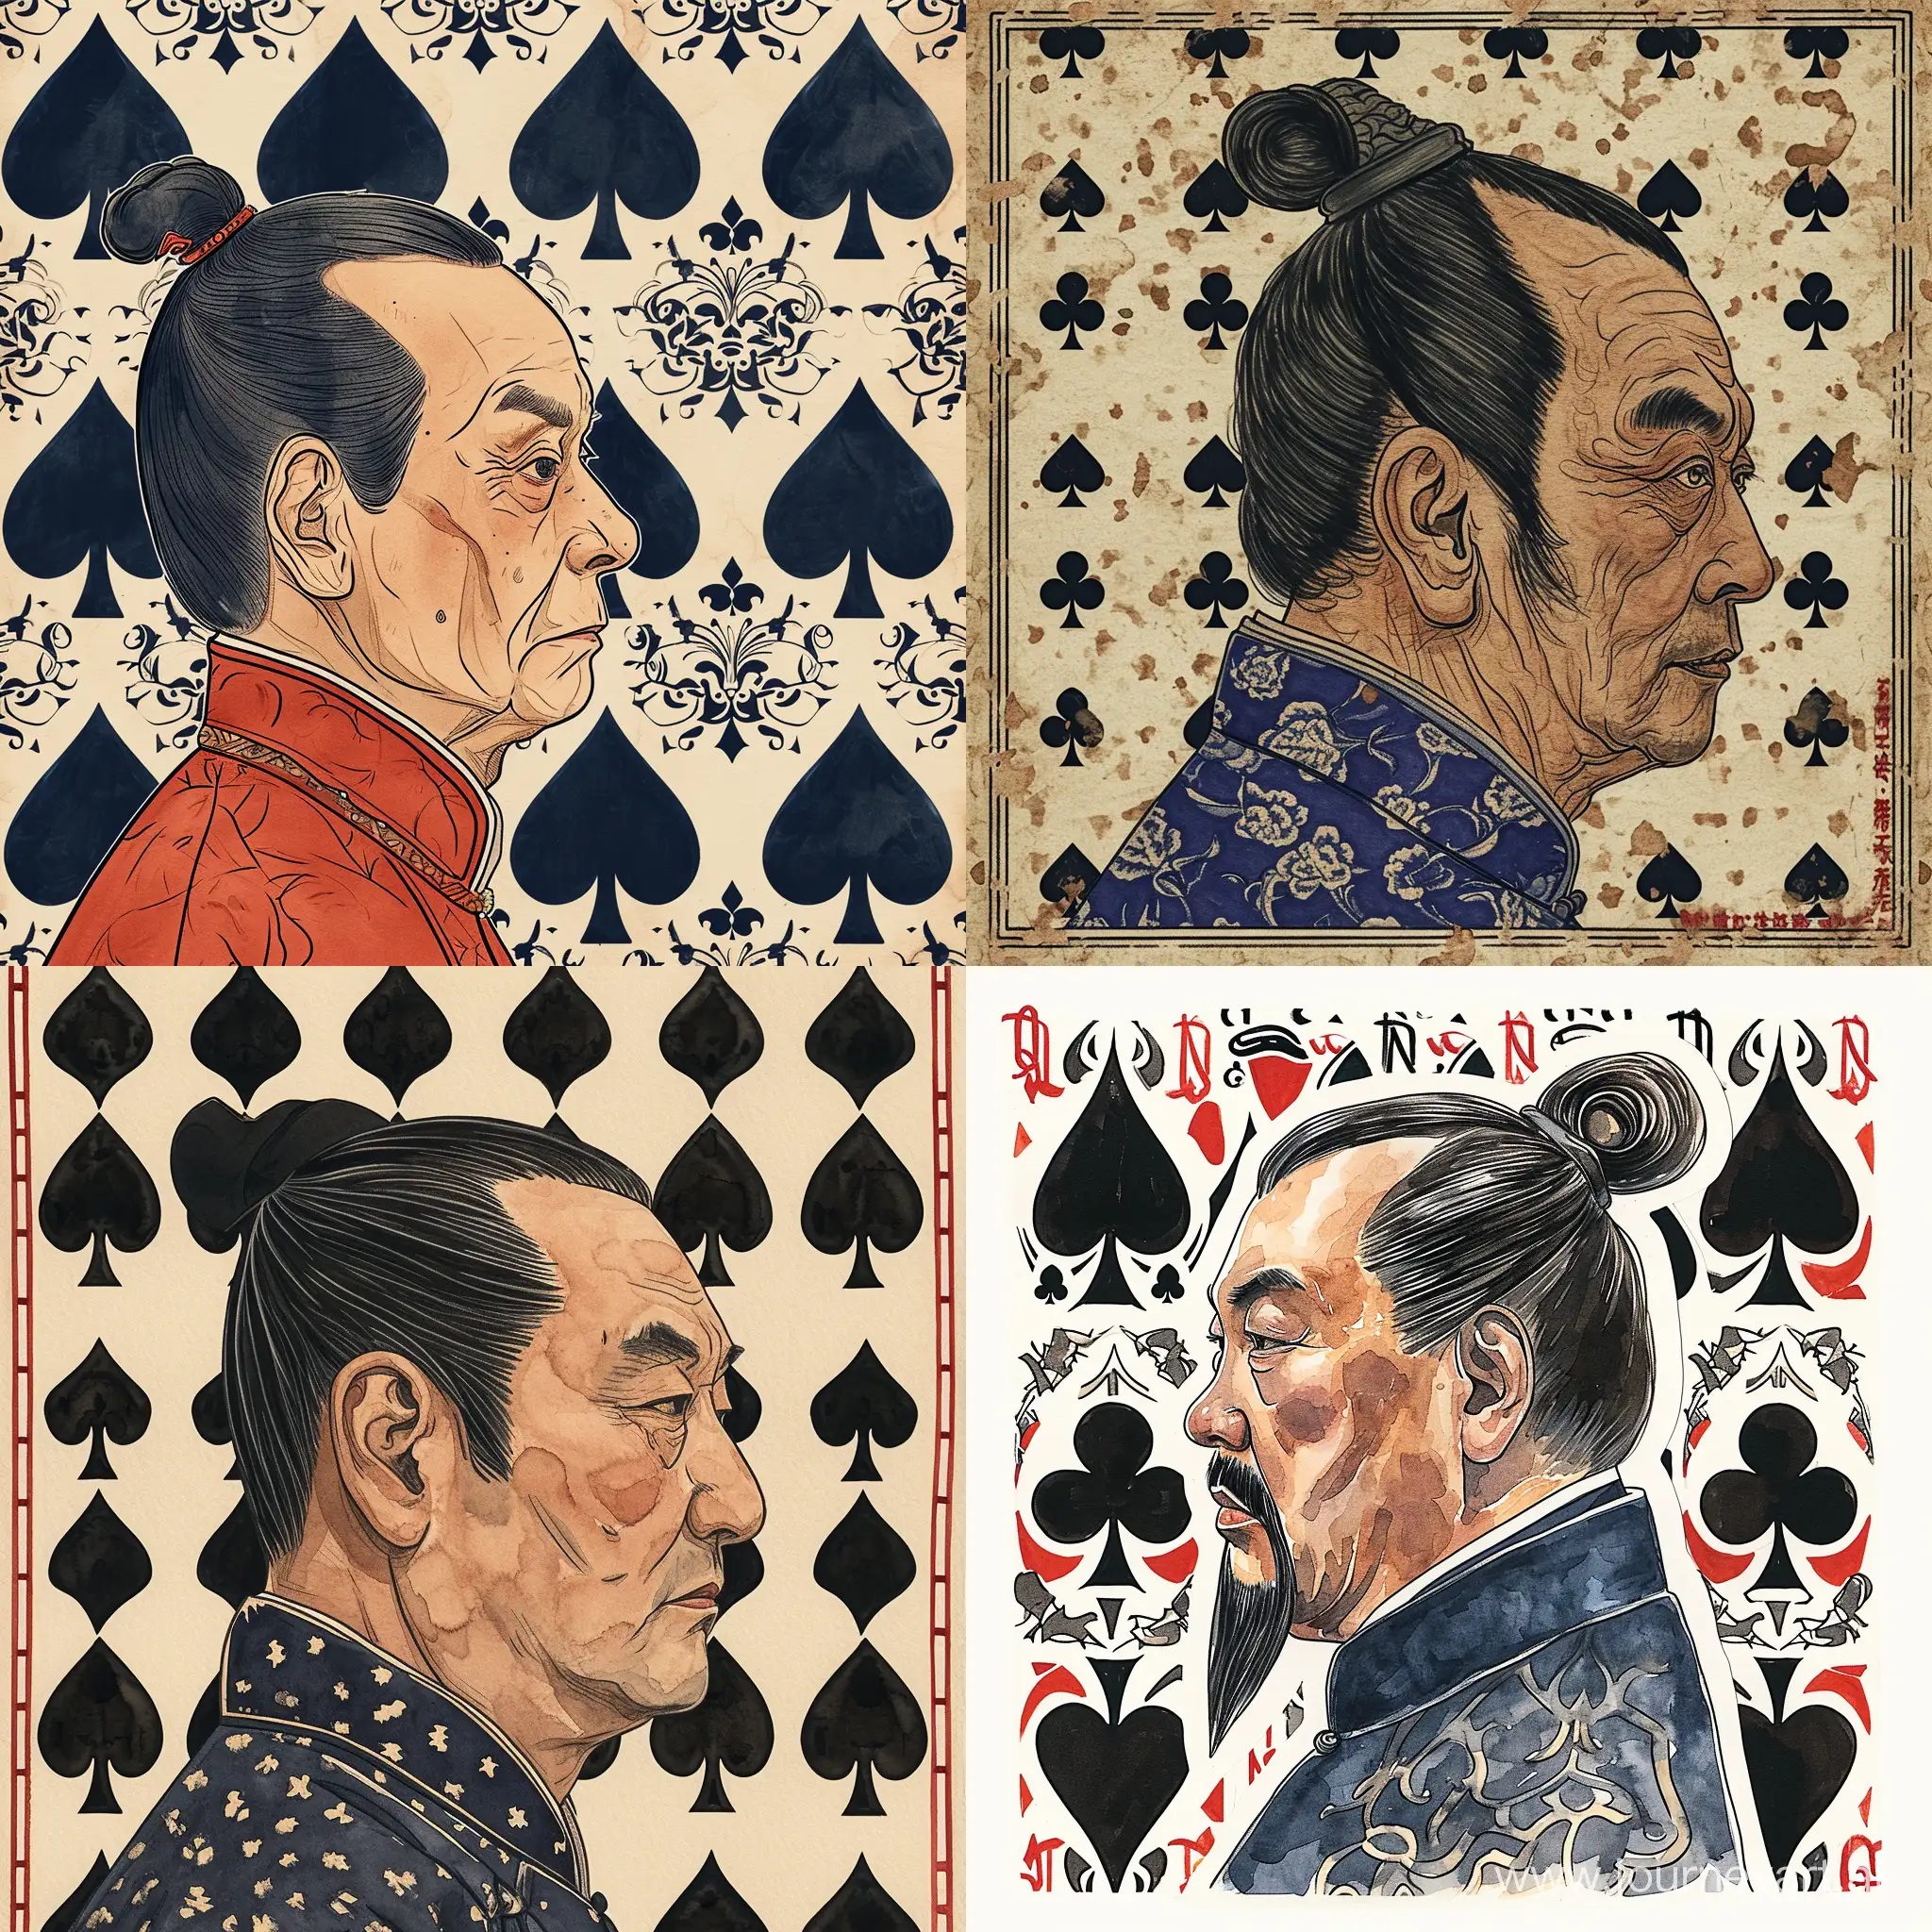 Emperor-Qin-Shihuangdi-Portrait-in-Victor-Ngai-Style-Watercolor-on-Spades-Pattern-Background